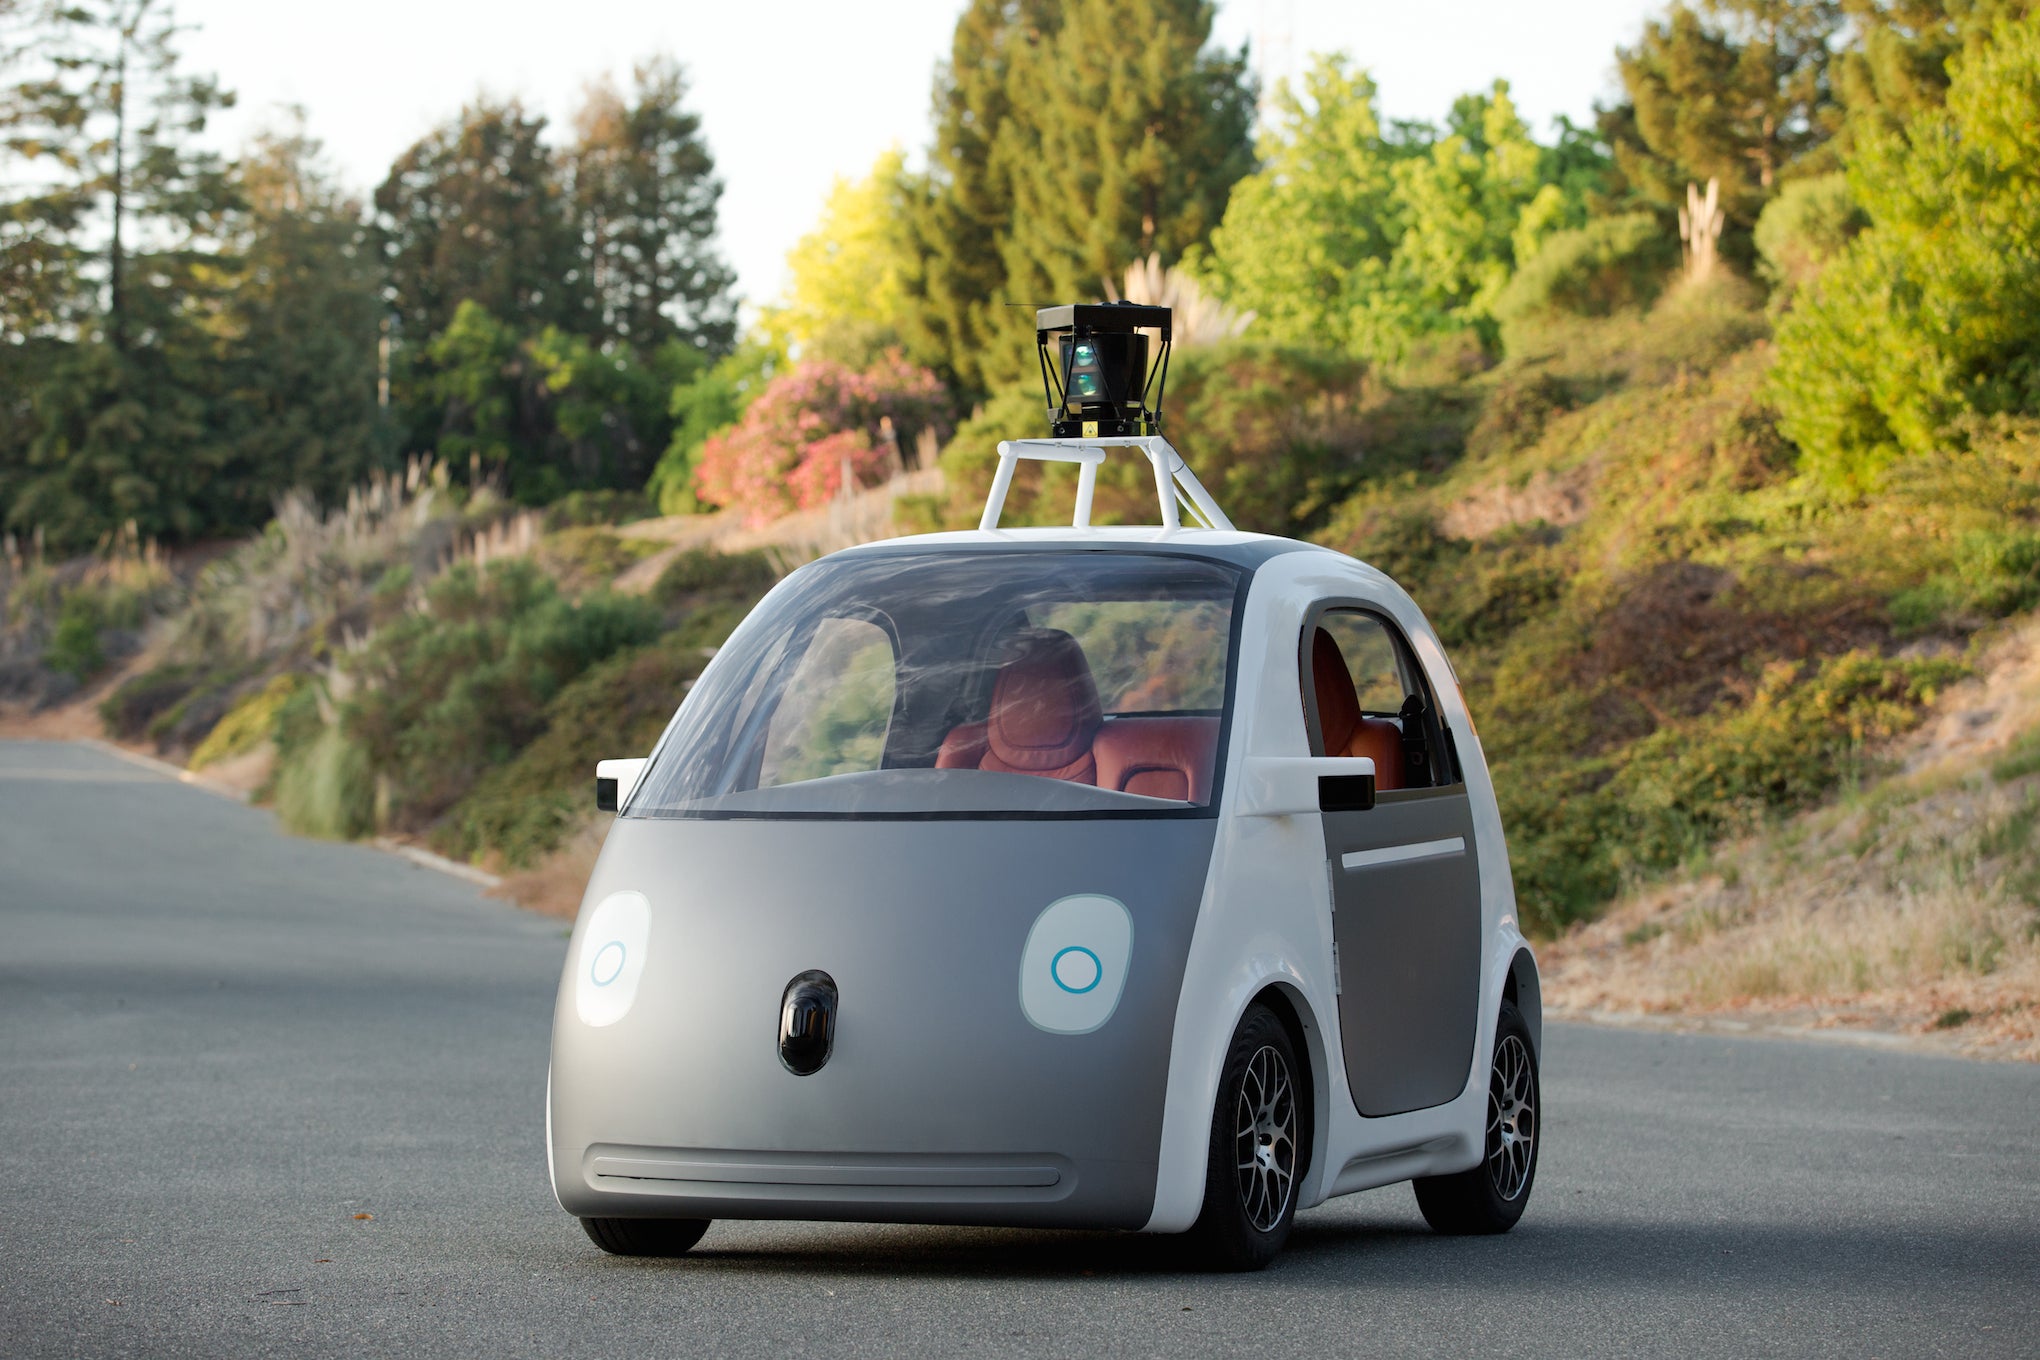 Google self-driving car prototype - Who killed the electric car? Not Apple, as it's working on a 'Titan' one